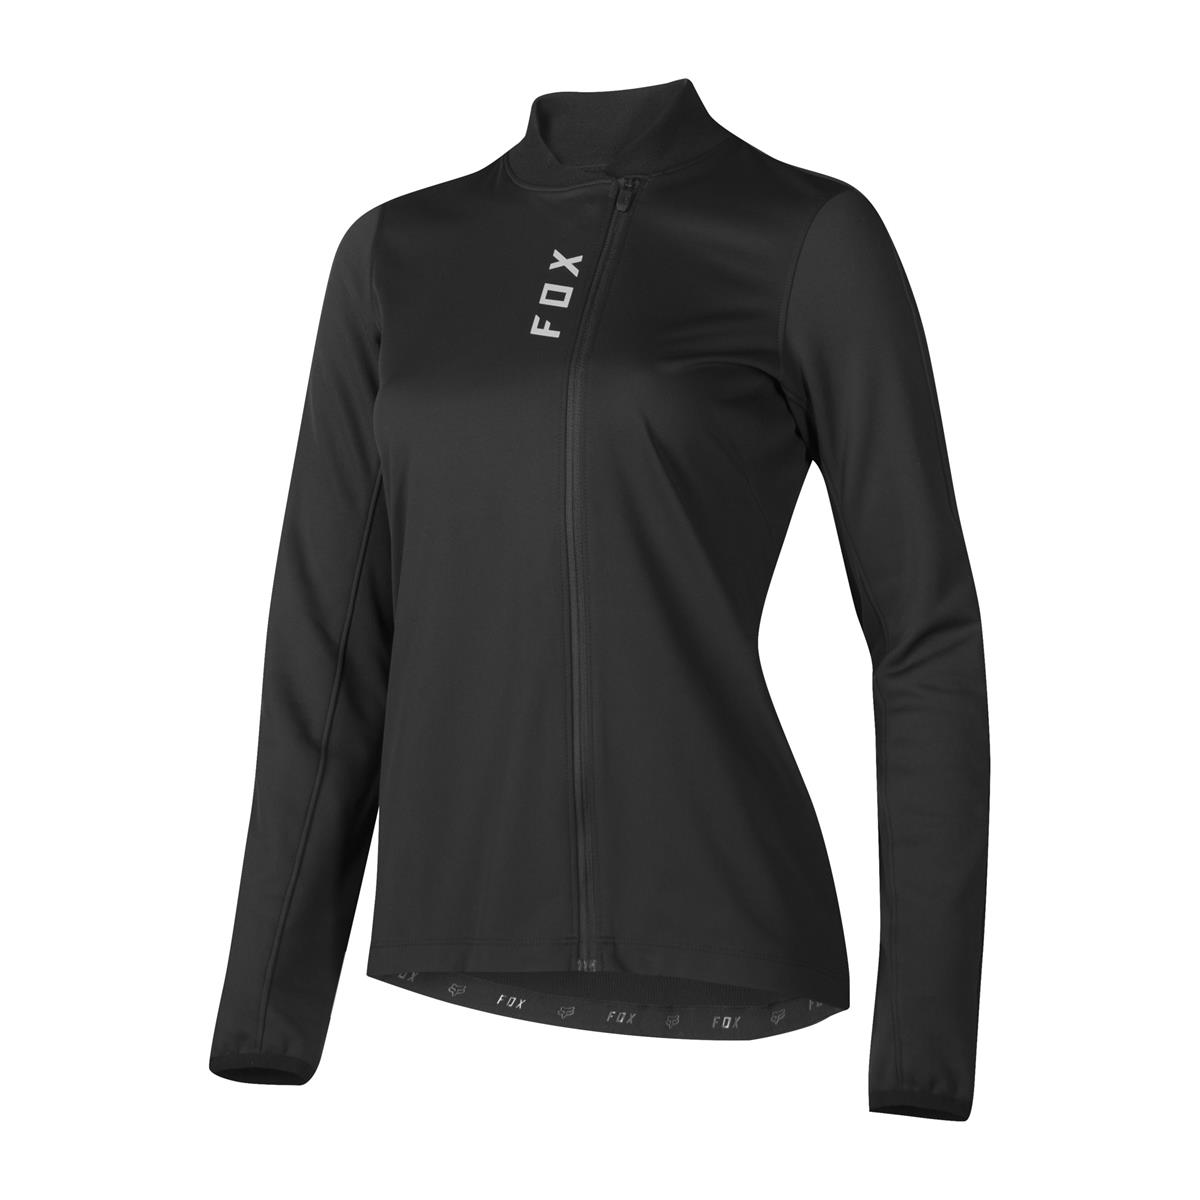 Fox Femme Maillot VTT Manches Courtes Attack Thermo Black